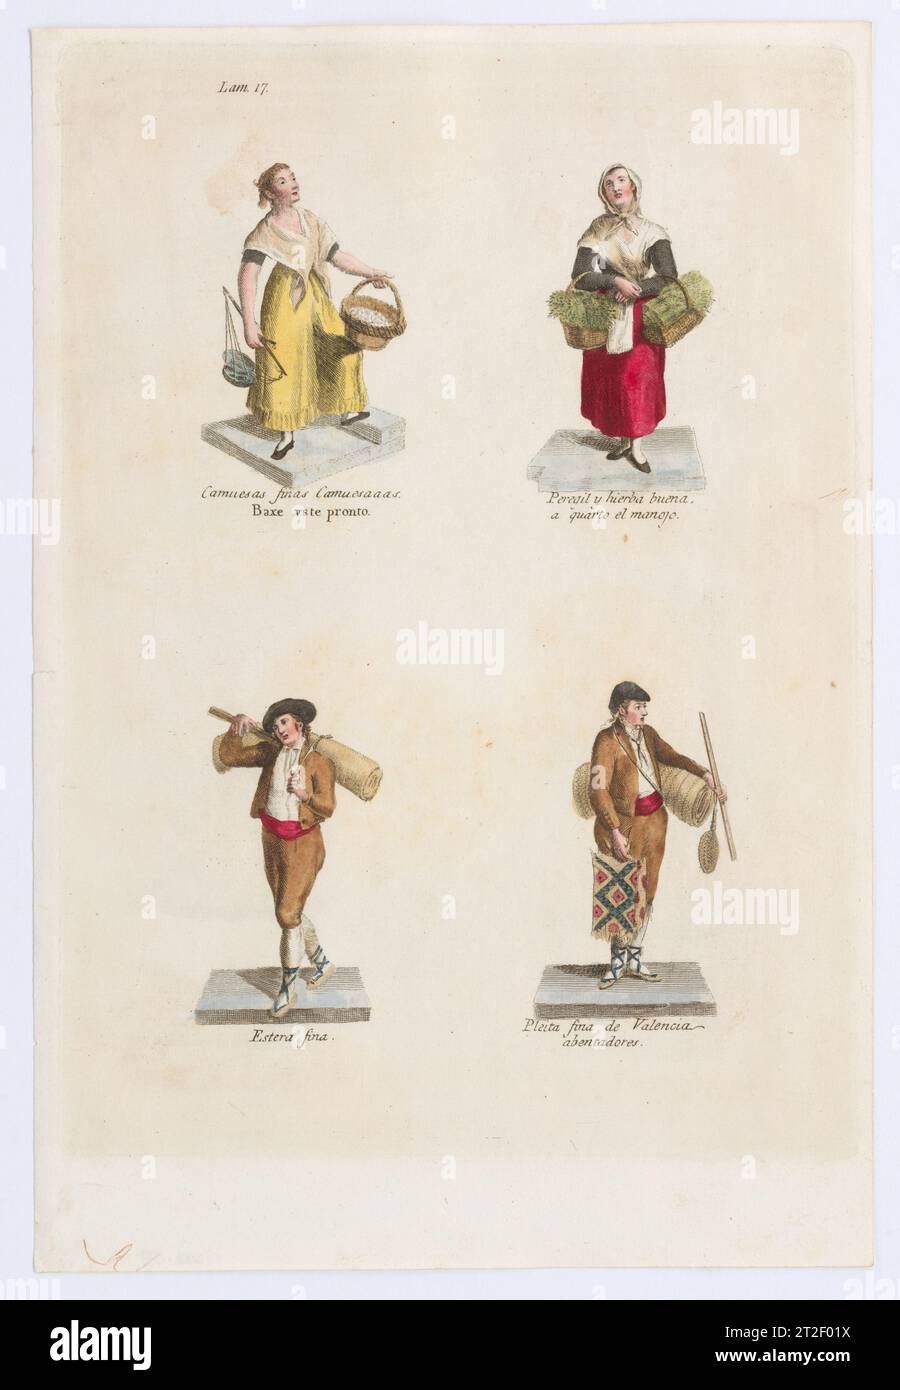 Plate 17: four street vendors from Madrid selling parsley, mats etc, from 'Los Gritos de Madrid' (The Cries of Madrid) Miguel Gamborino Spanish 1809–17 See comment for 2022.53. View more. Plate 17: four street vendors from Madrid selling parsley, mats etc, from 'Los Gritos de Madrid' (The Cries of Madrid). Miguel Gamborino (Spanish, Valencia 1760–1828 Madrid). 1809–17. Engraving with hand coloring. Prints Stock Photo